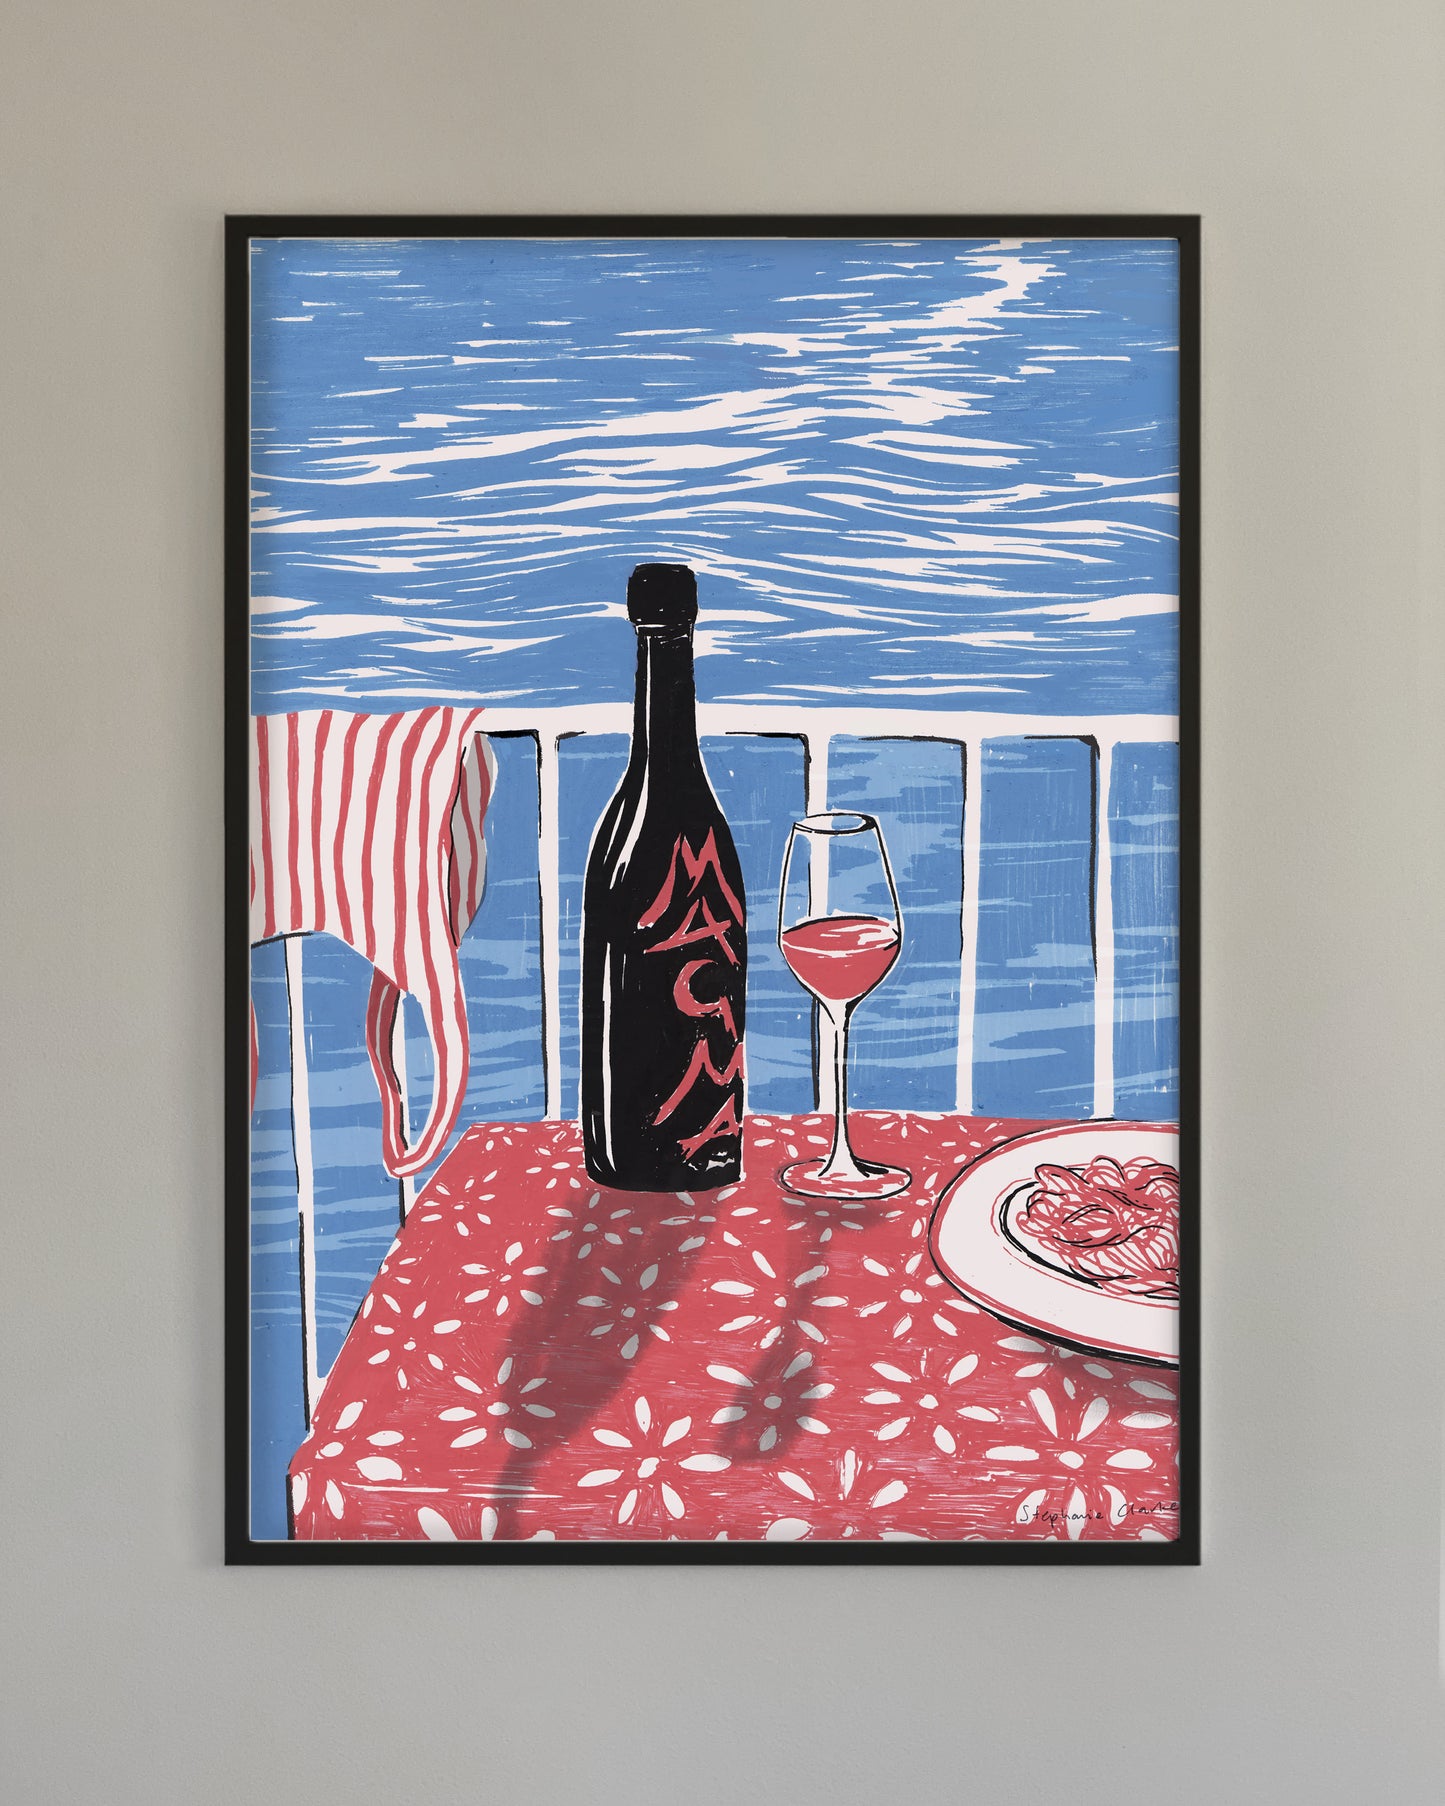 Wine poster. Wine art. Exclusive wine art posters. Premium quality wine art poster. Printed on environmentally friendly FSC marked paper.